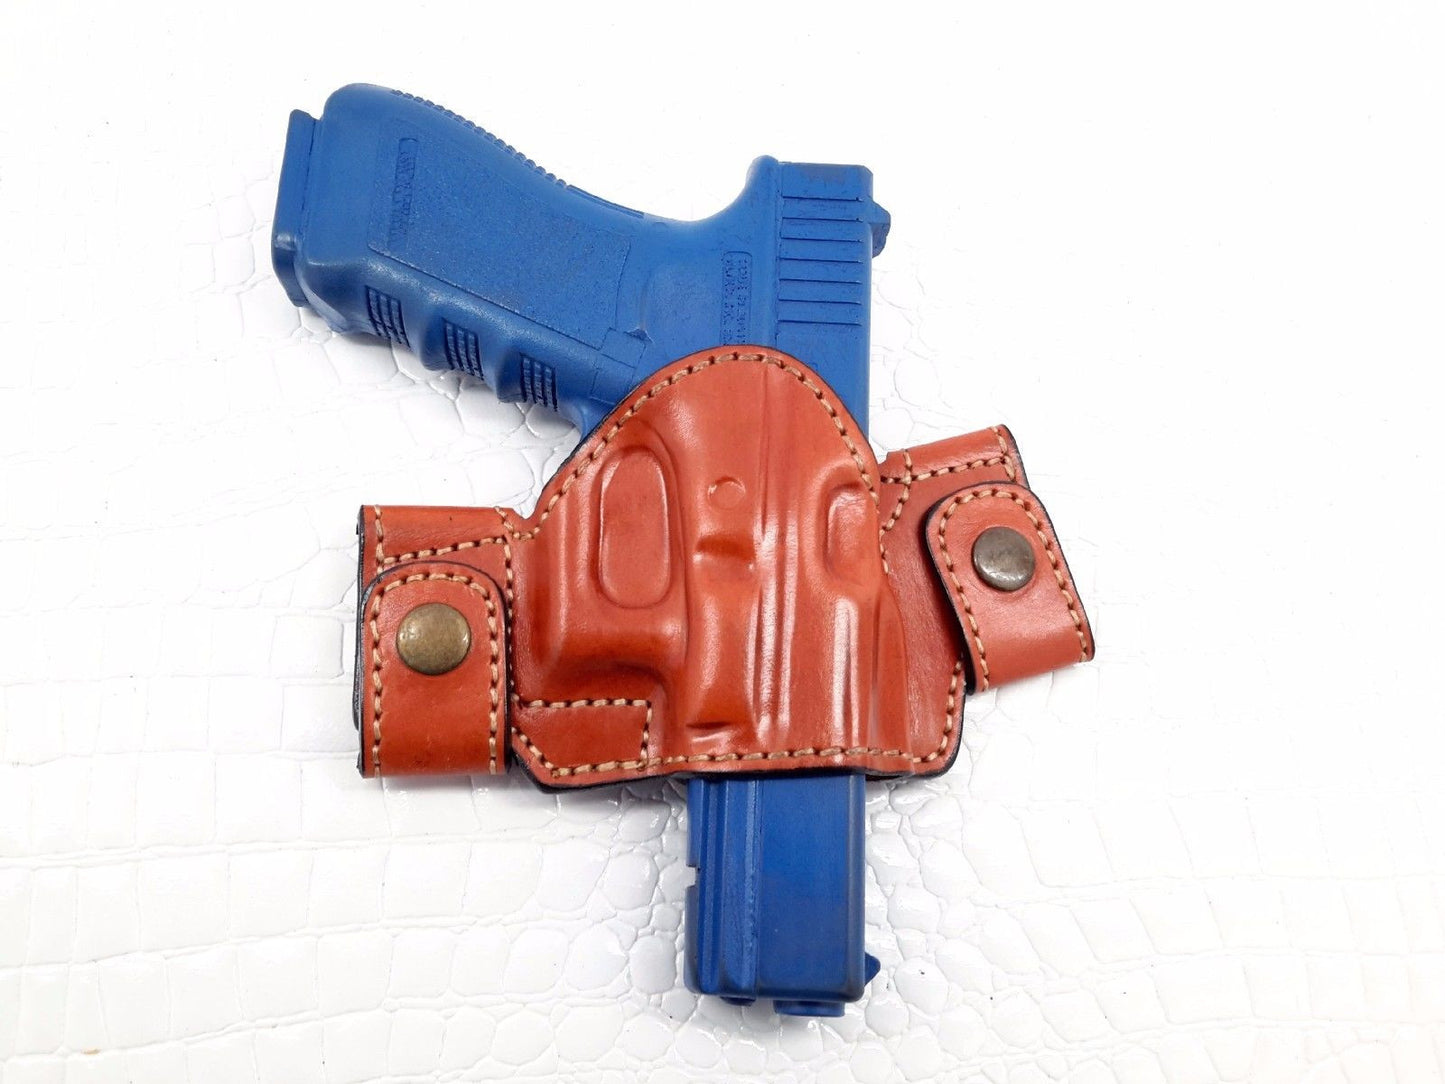 Glock 17 Snap-on Right Hand Leather Holster - Choose your Style